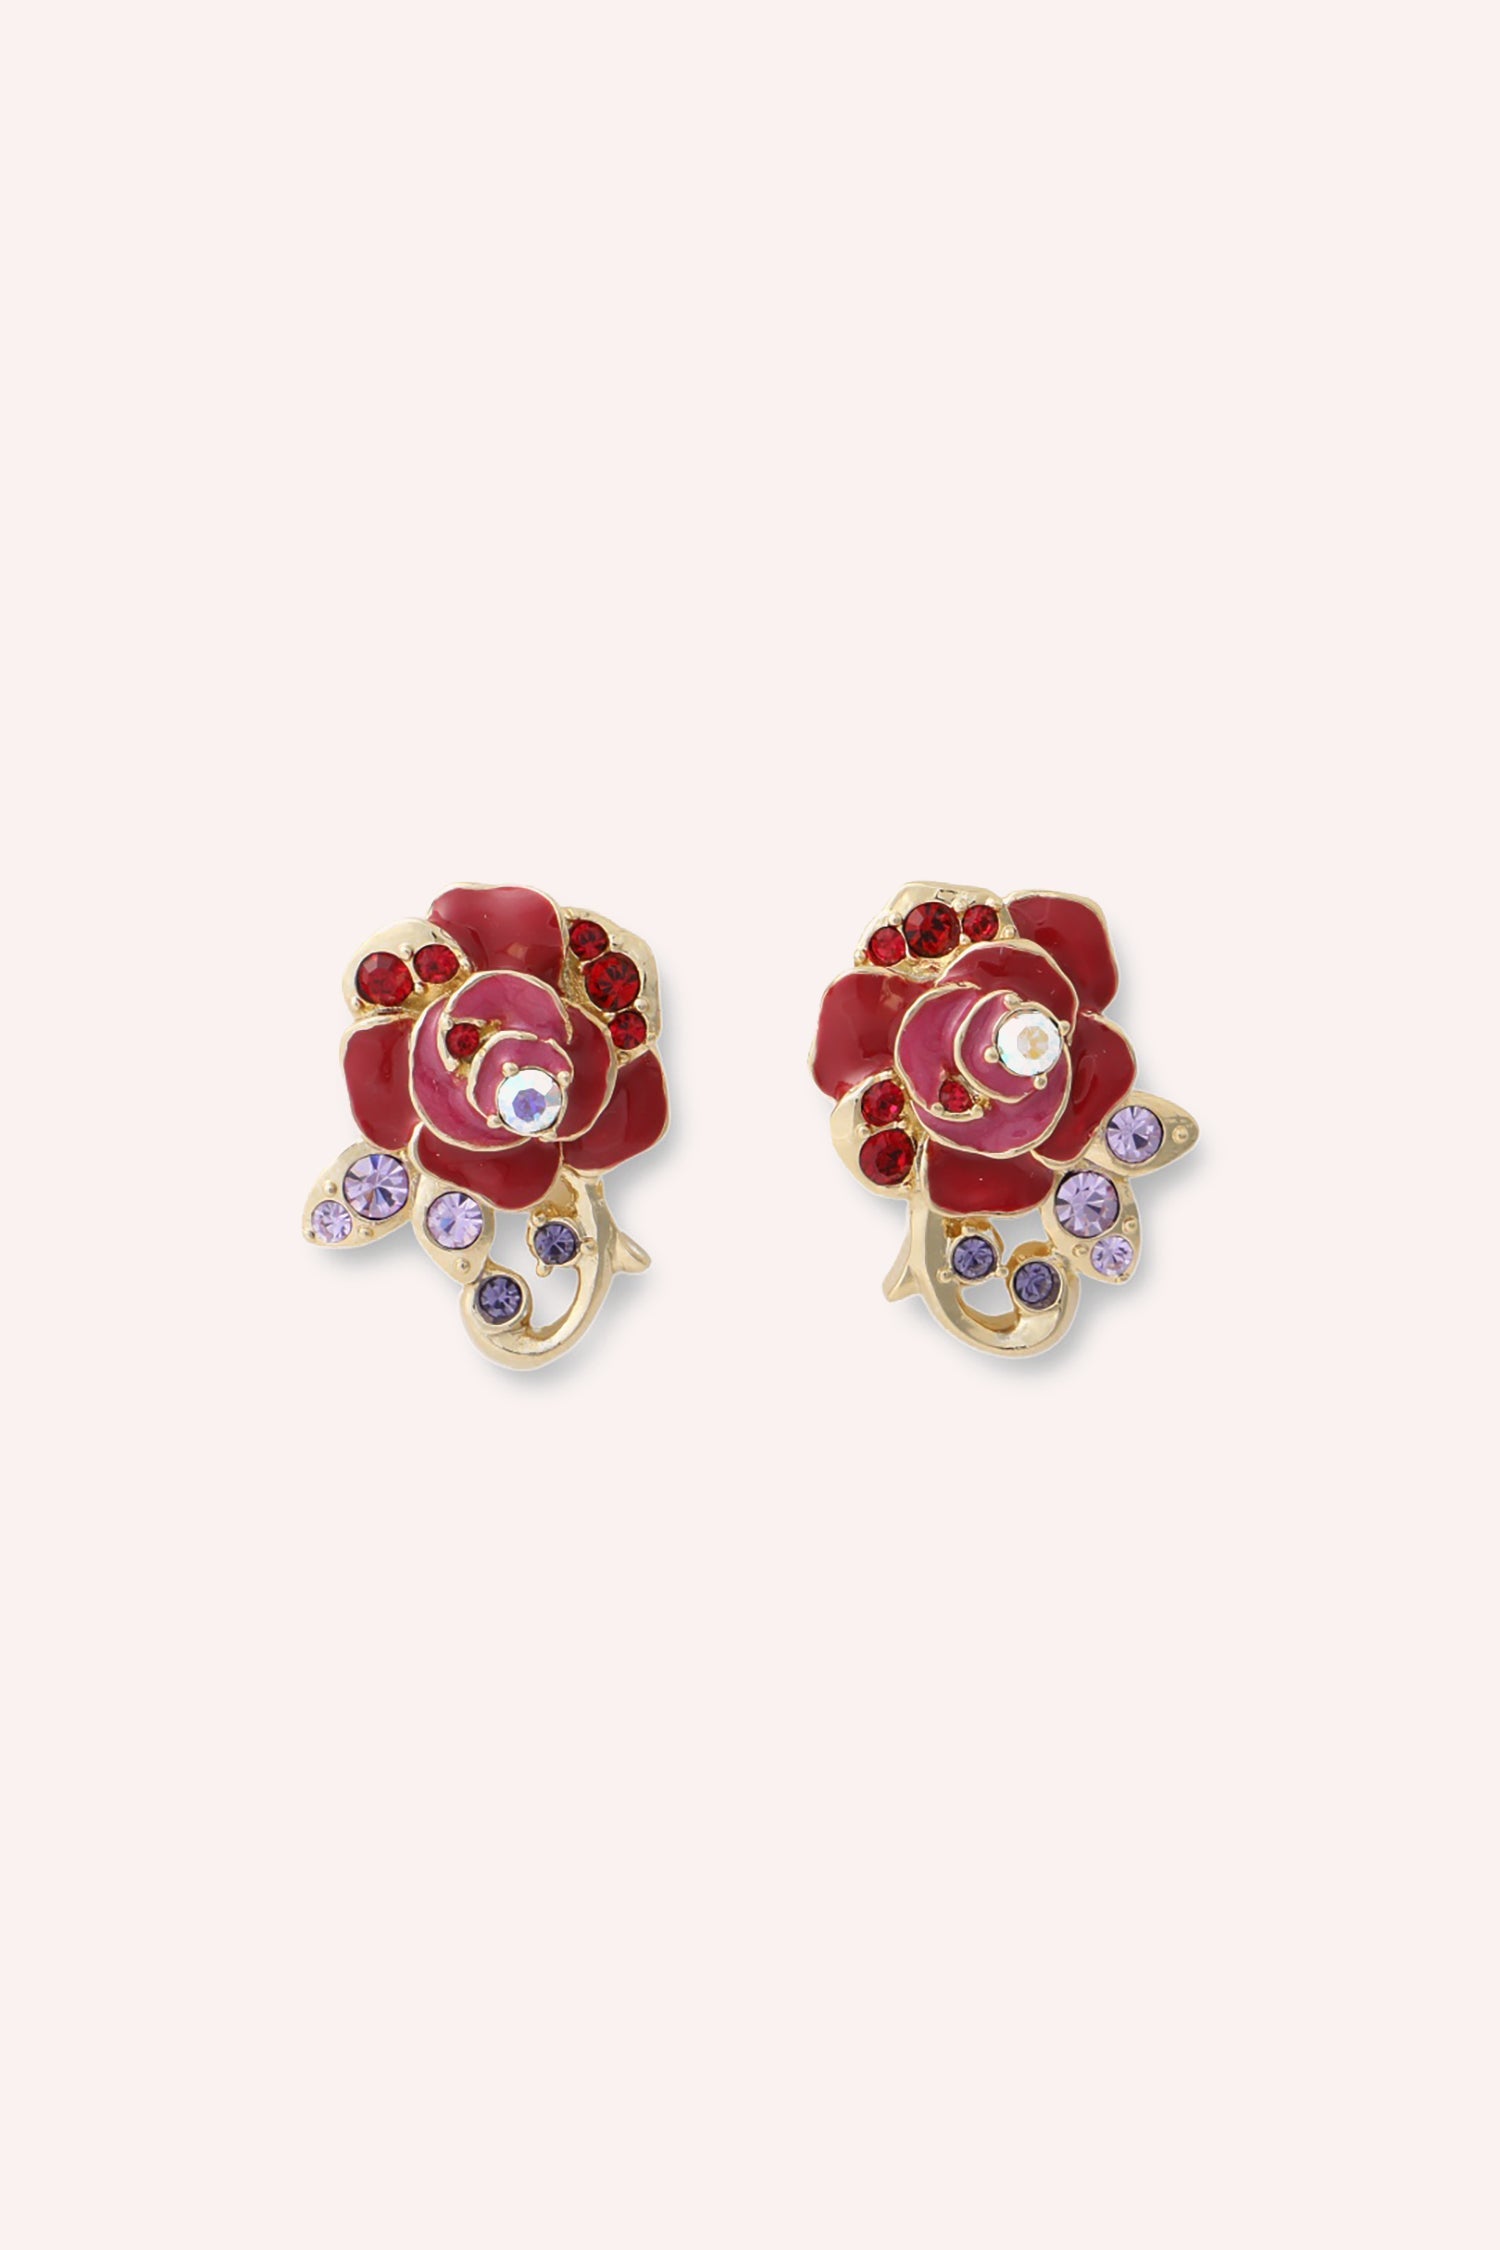 Rose Stud Earrings, Magenta Rose Earrings, Embellished with Gems and Gold floral Details